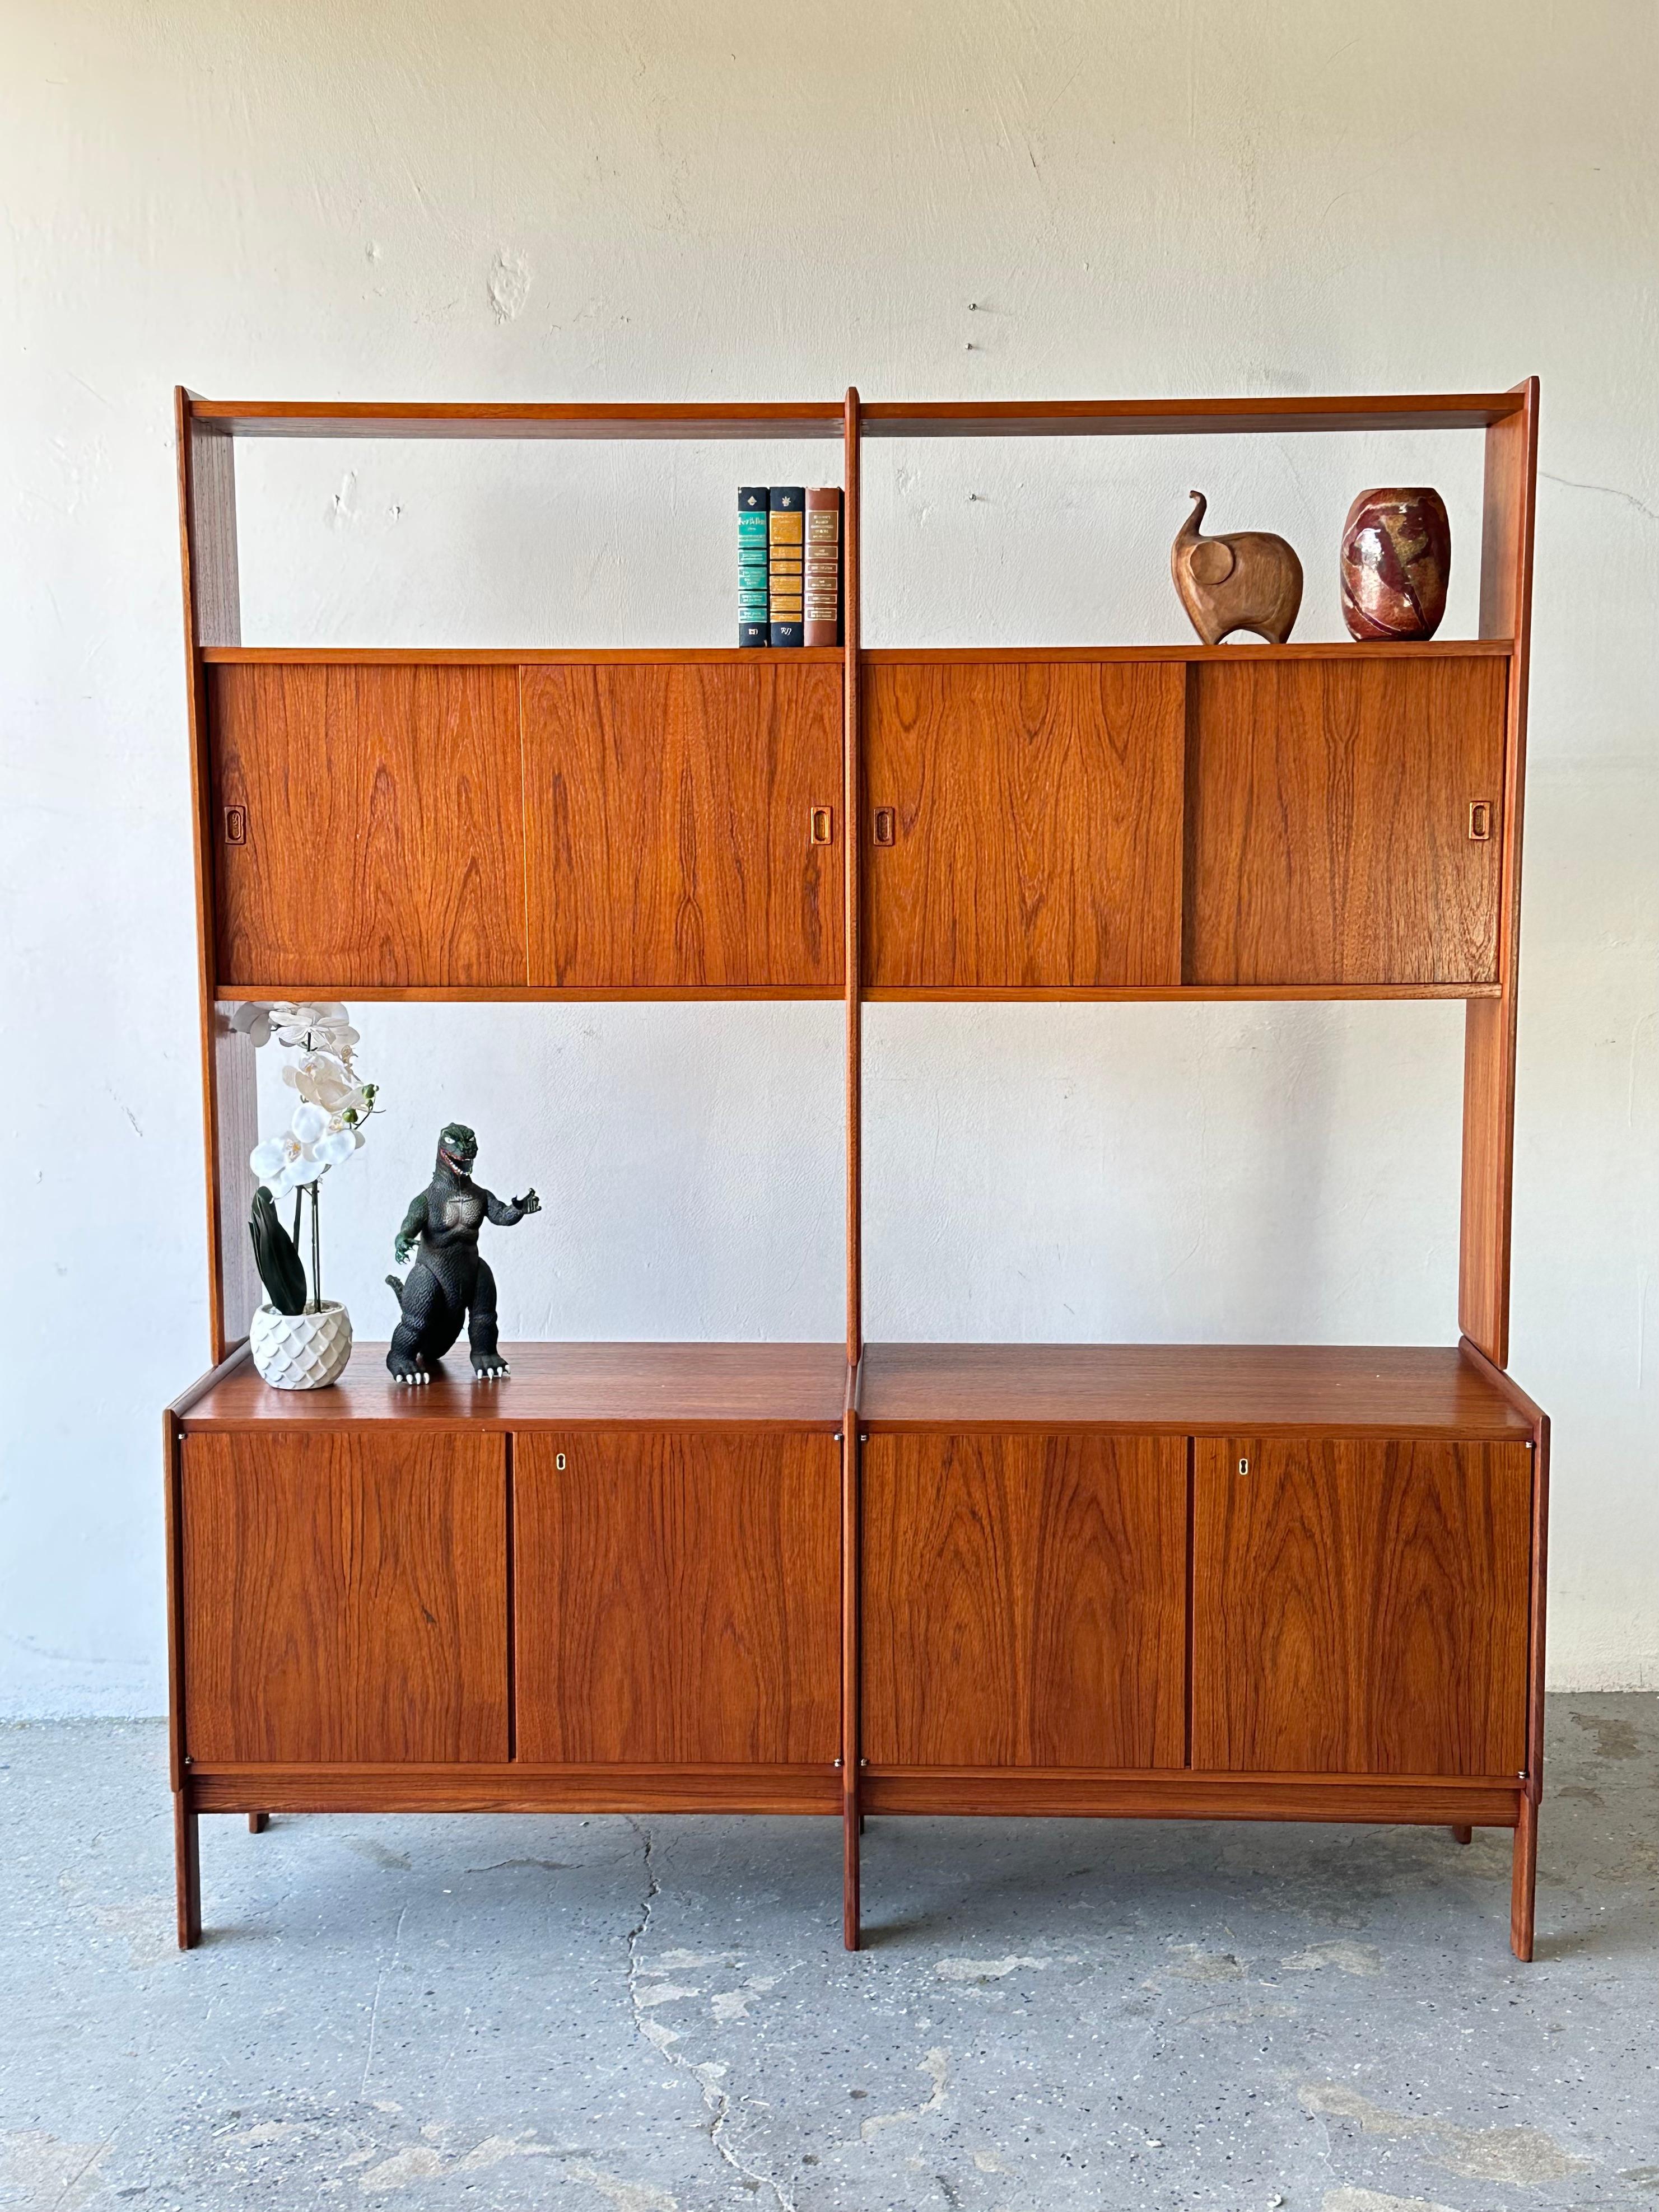 Very cool teak wall units comes with two sliding cabinets up top and two key locked cabinets  below (comes with one key). Lots of space To show off your goodies. Unknown maker but definitelyhigh  quality don't miss out

Some very slight Age